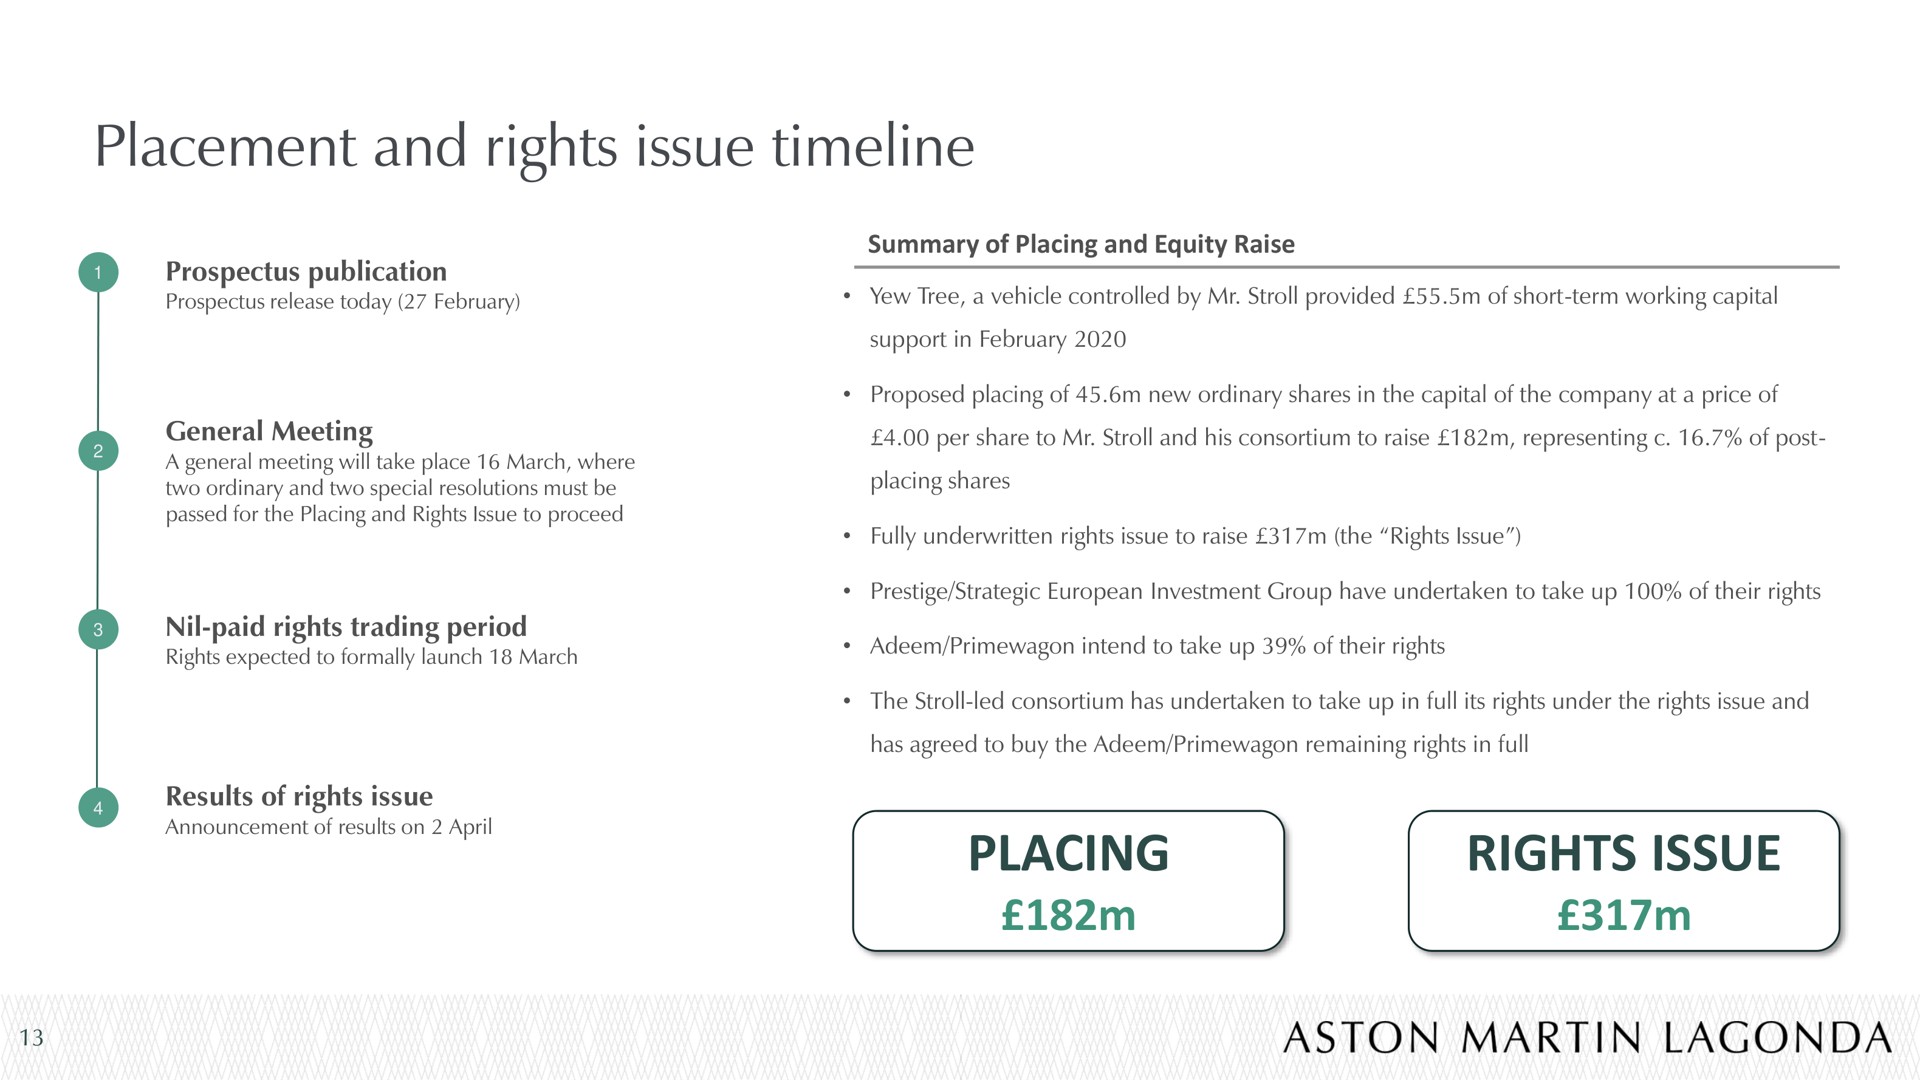 placement and rights issue placing rights issue | Aston Martin Lagonda